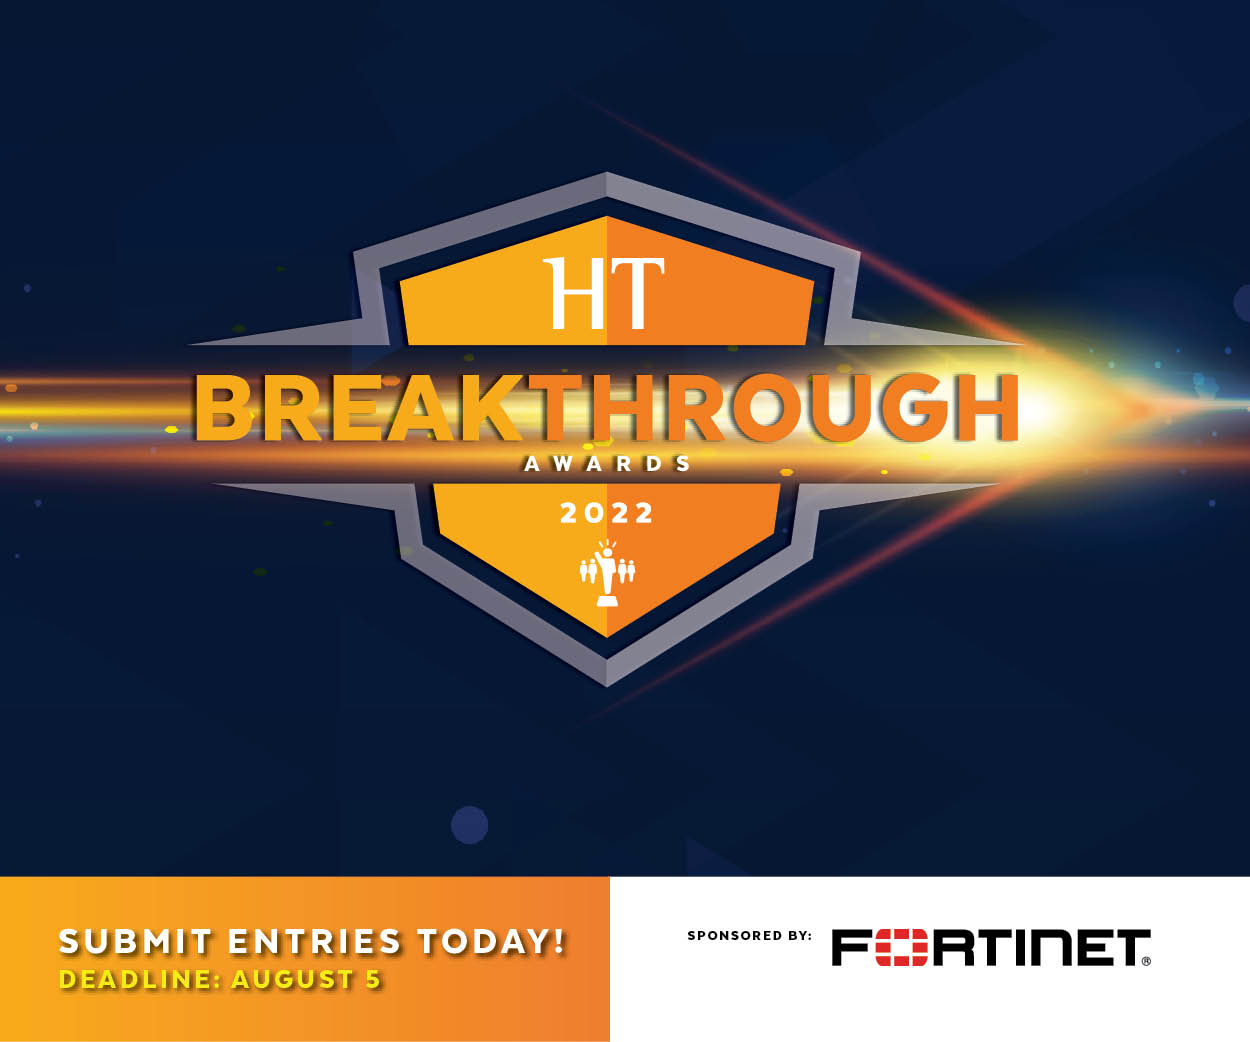 The deadline to nominate restaurants for the 2022 MURTEC Breakthrough Awards, sponsored by Fortinet, is August 5.